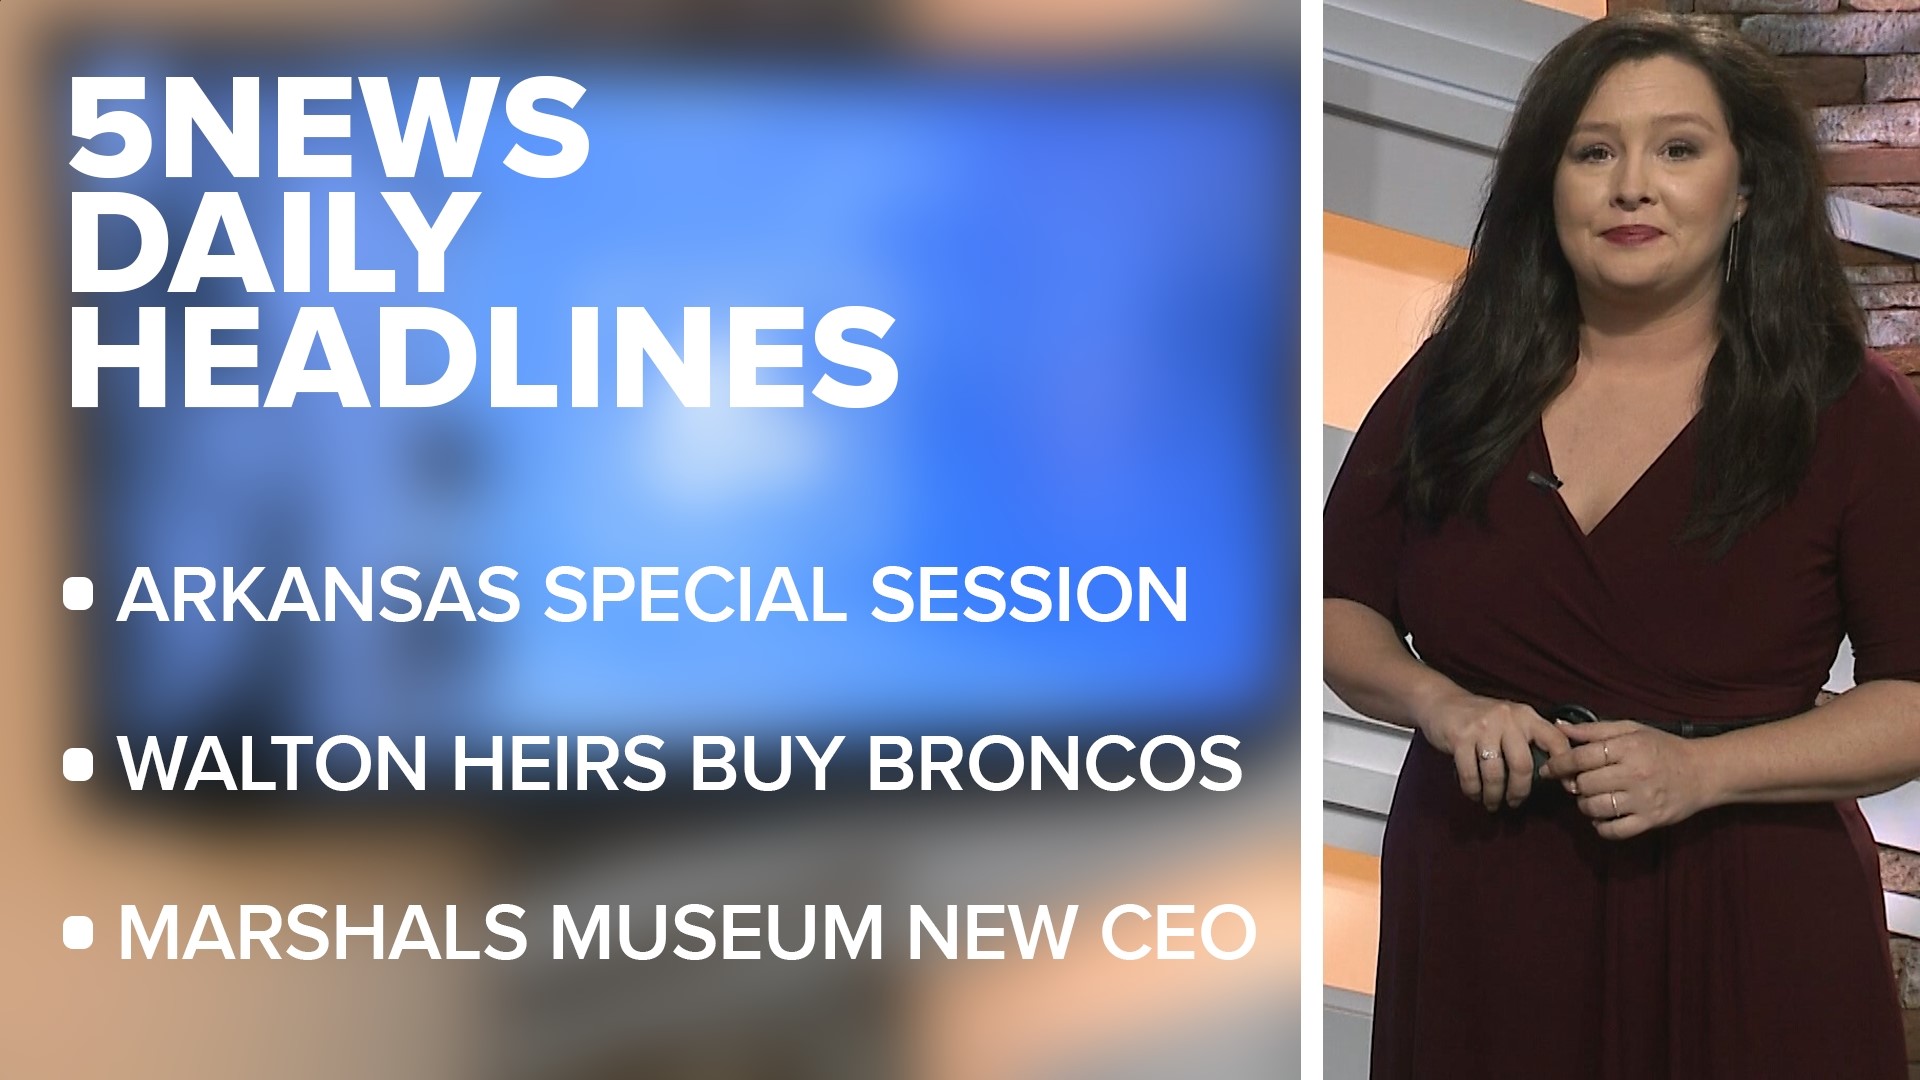 Arkansas lawmakers convene for special session, Walton heirs now own Denver Broncos, and the US Marshals Museum names a new CEO.